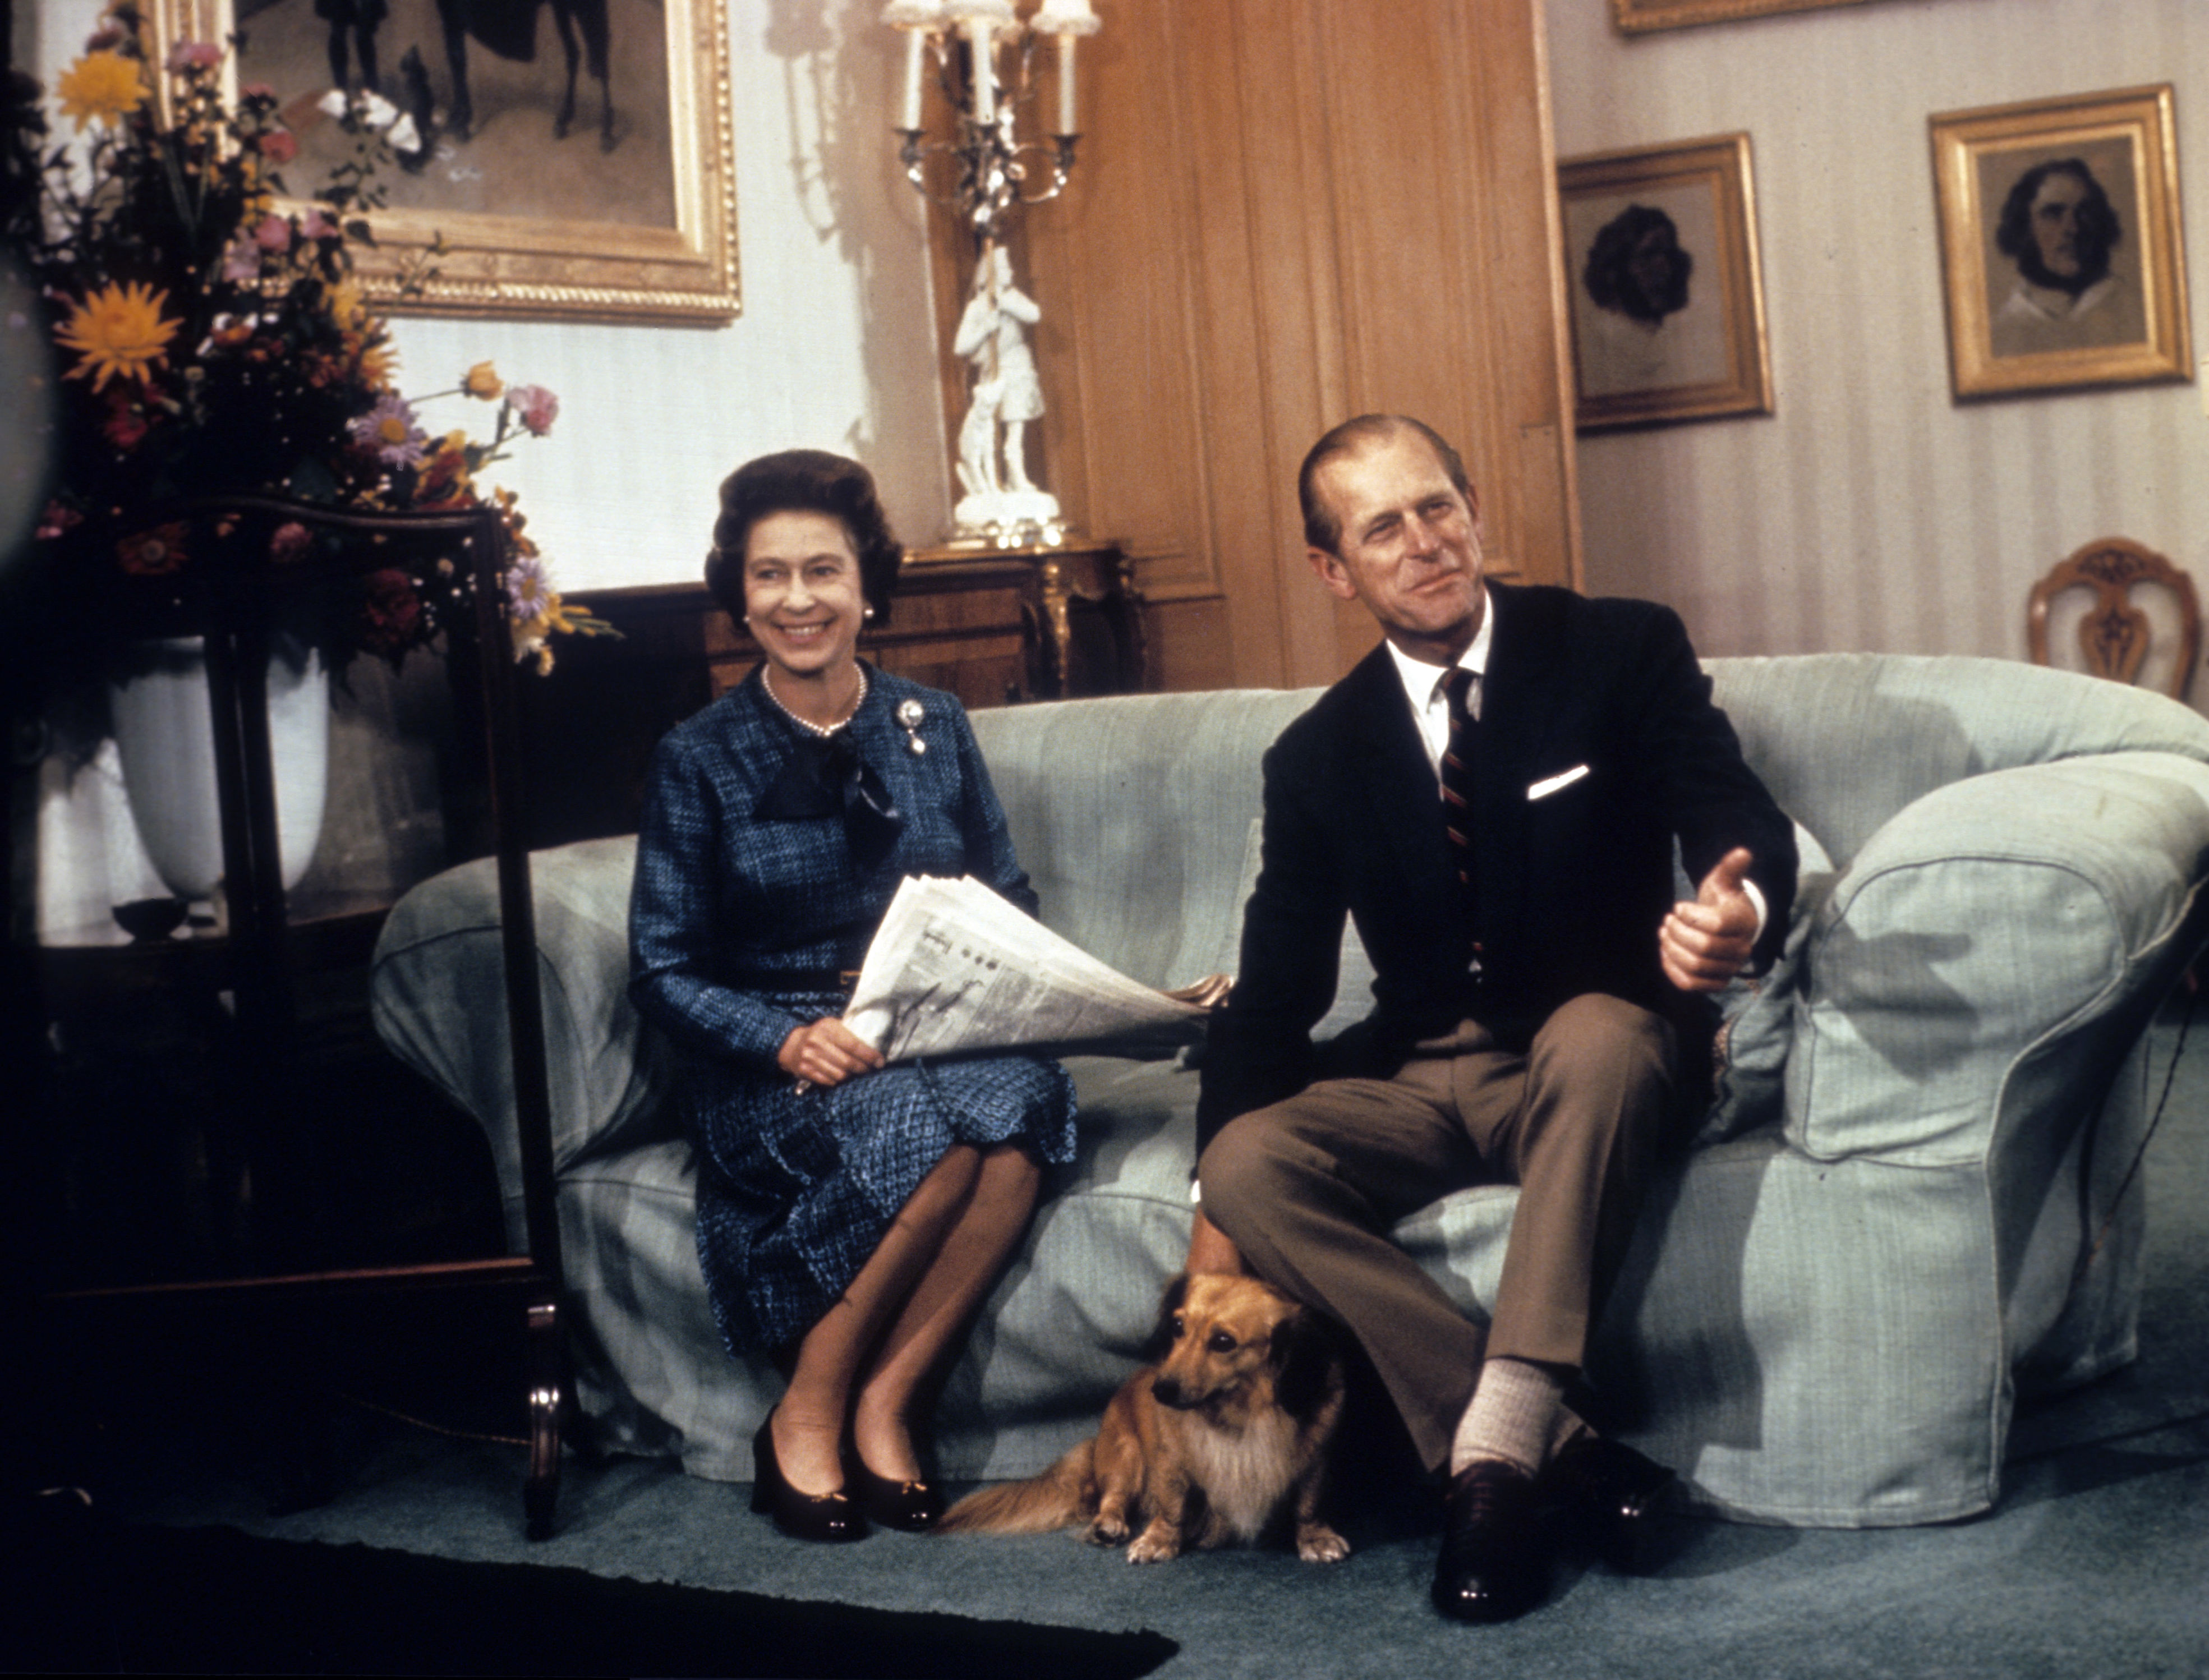 <p>Here's another peek inside Balmoral: This photo was taken as Queen Elizabeth ll and Prince Philip, Duke of Edinburgh, relaxed with one of their many dogs while on holiday in Scotland on Sept. 26, 1976.</p>